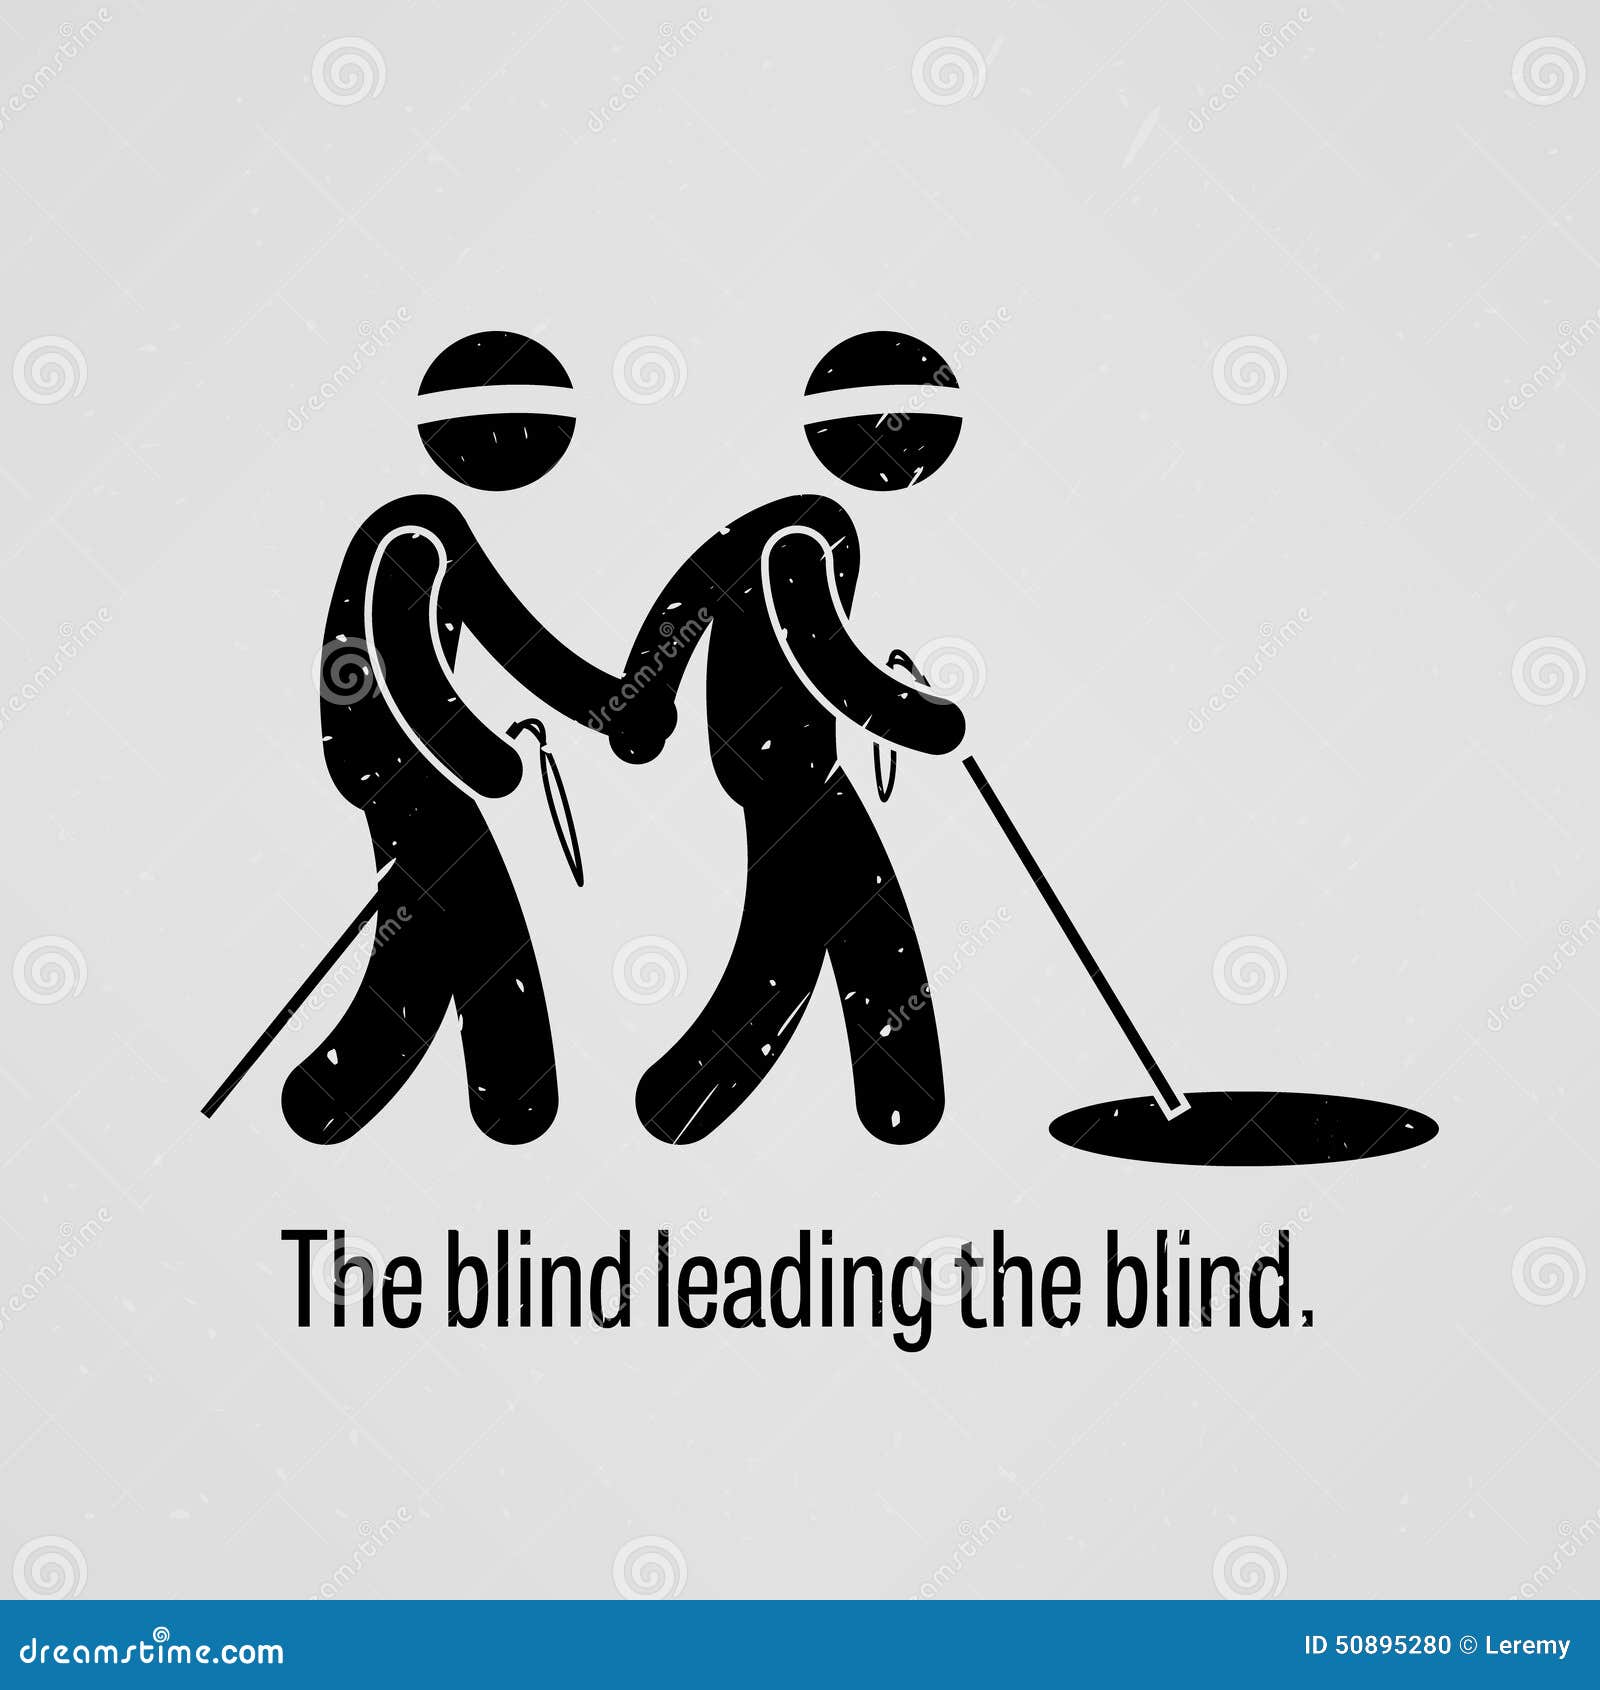 blind-leading-blind-motivational-inspirational-poster-representing-proverb-sayings-simple-human-pictogram-50895280.jpg